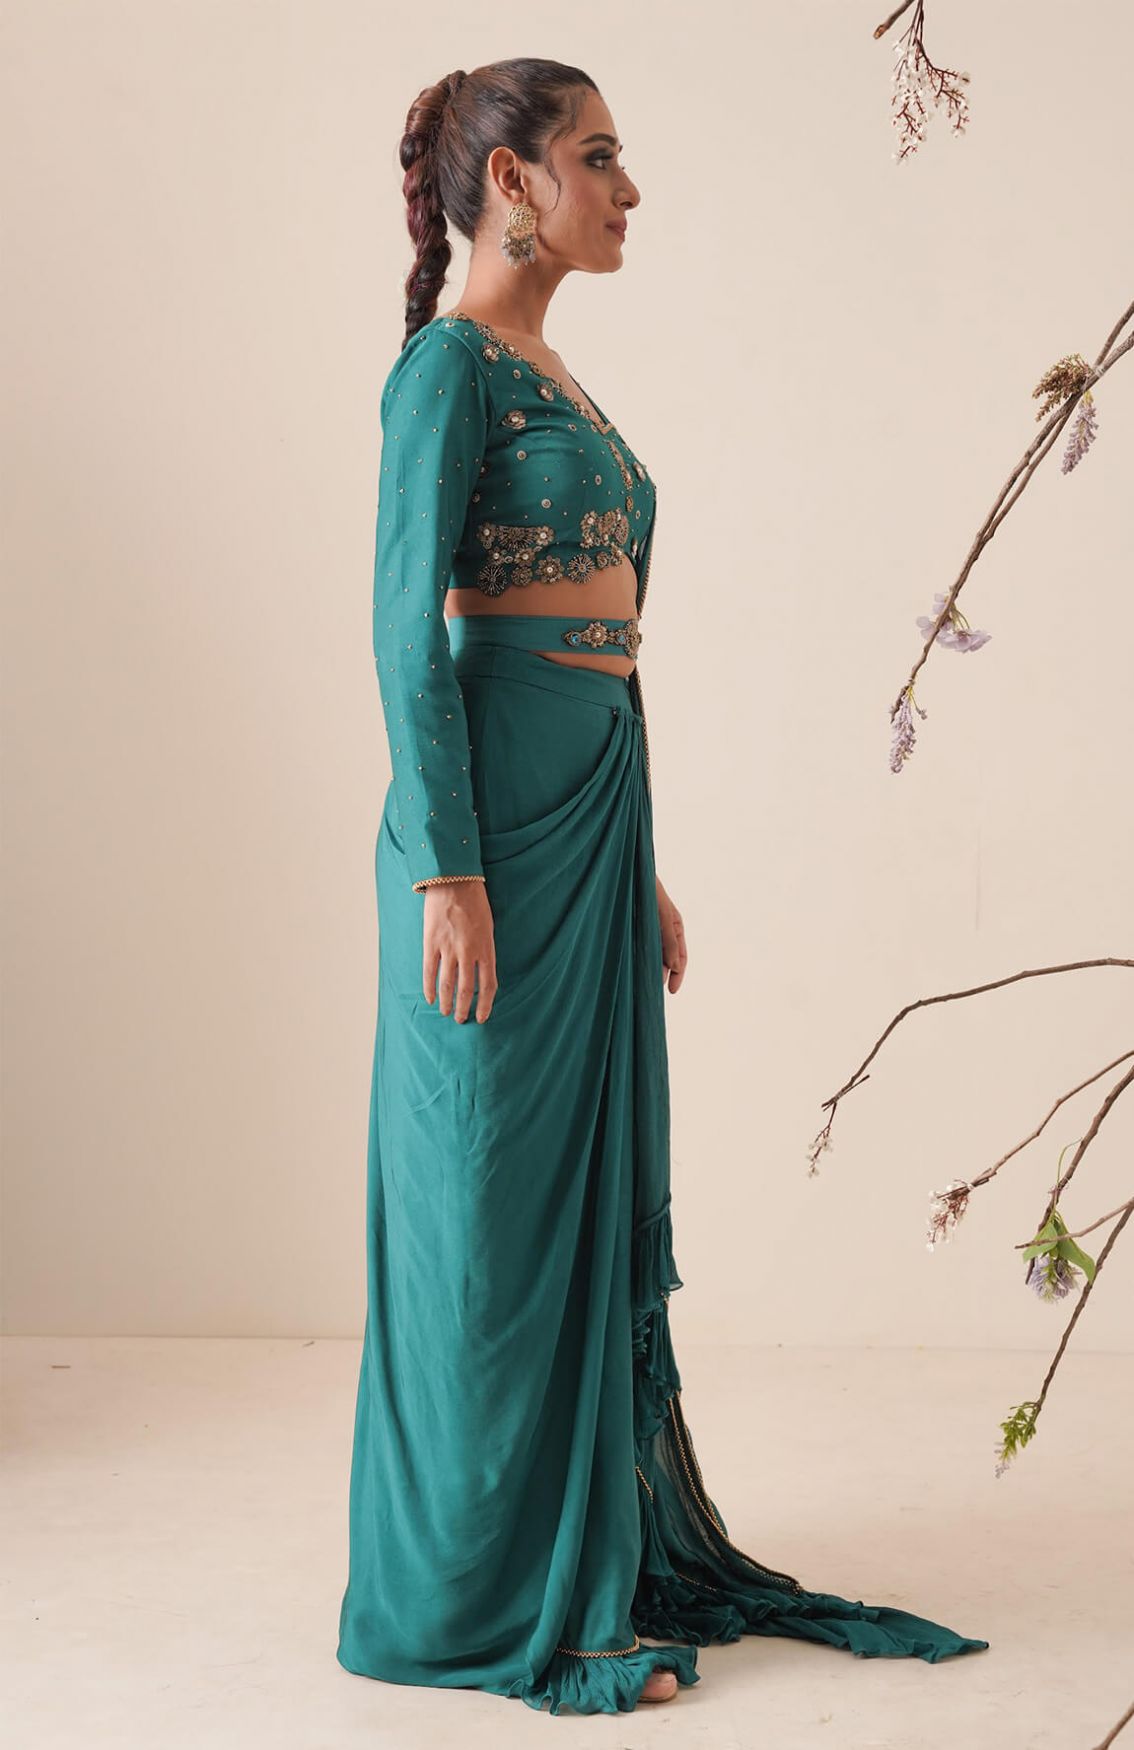 Teal Colour Pre-drape Saree With Waist Belt And Pallu Comes In A Full Sleeve Style.